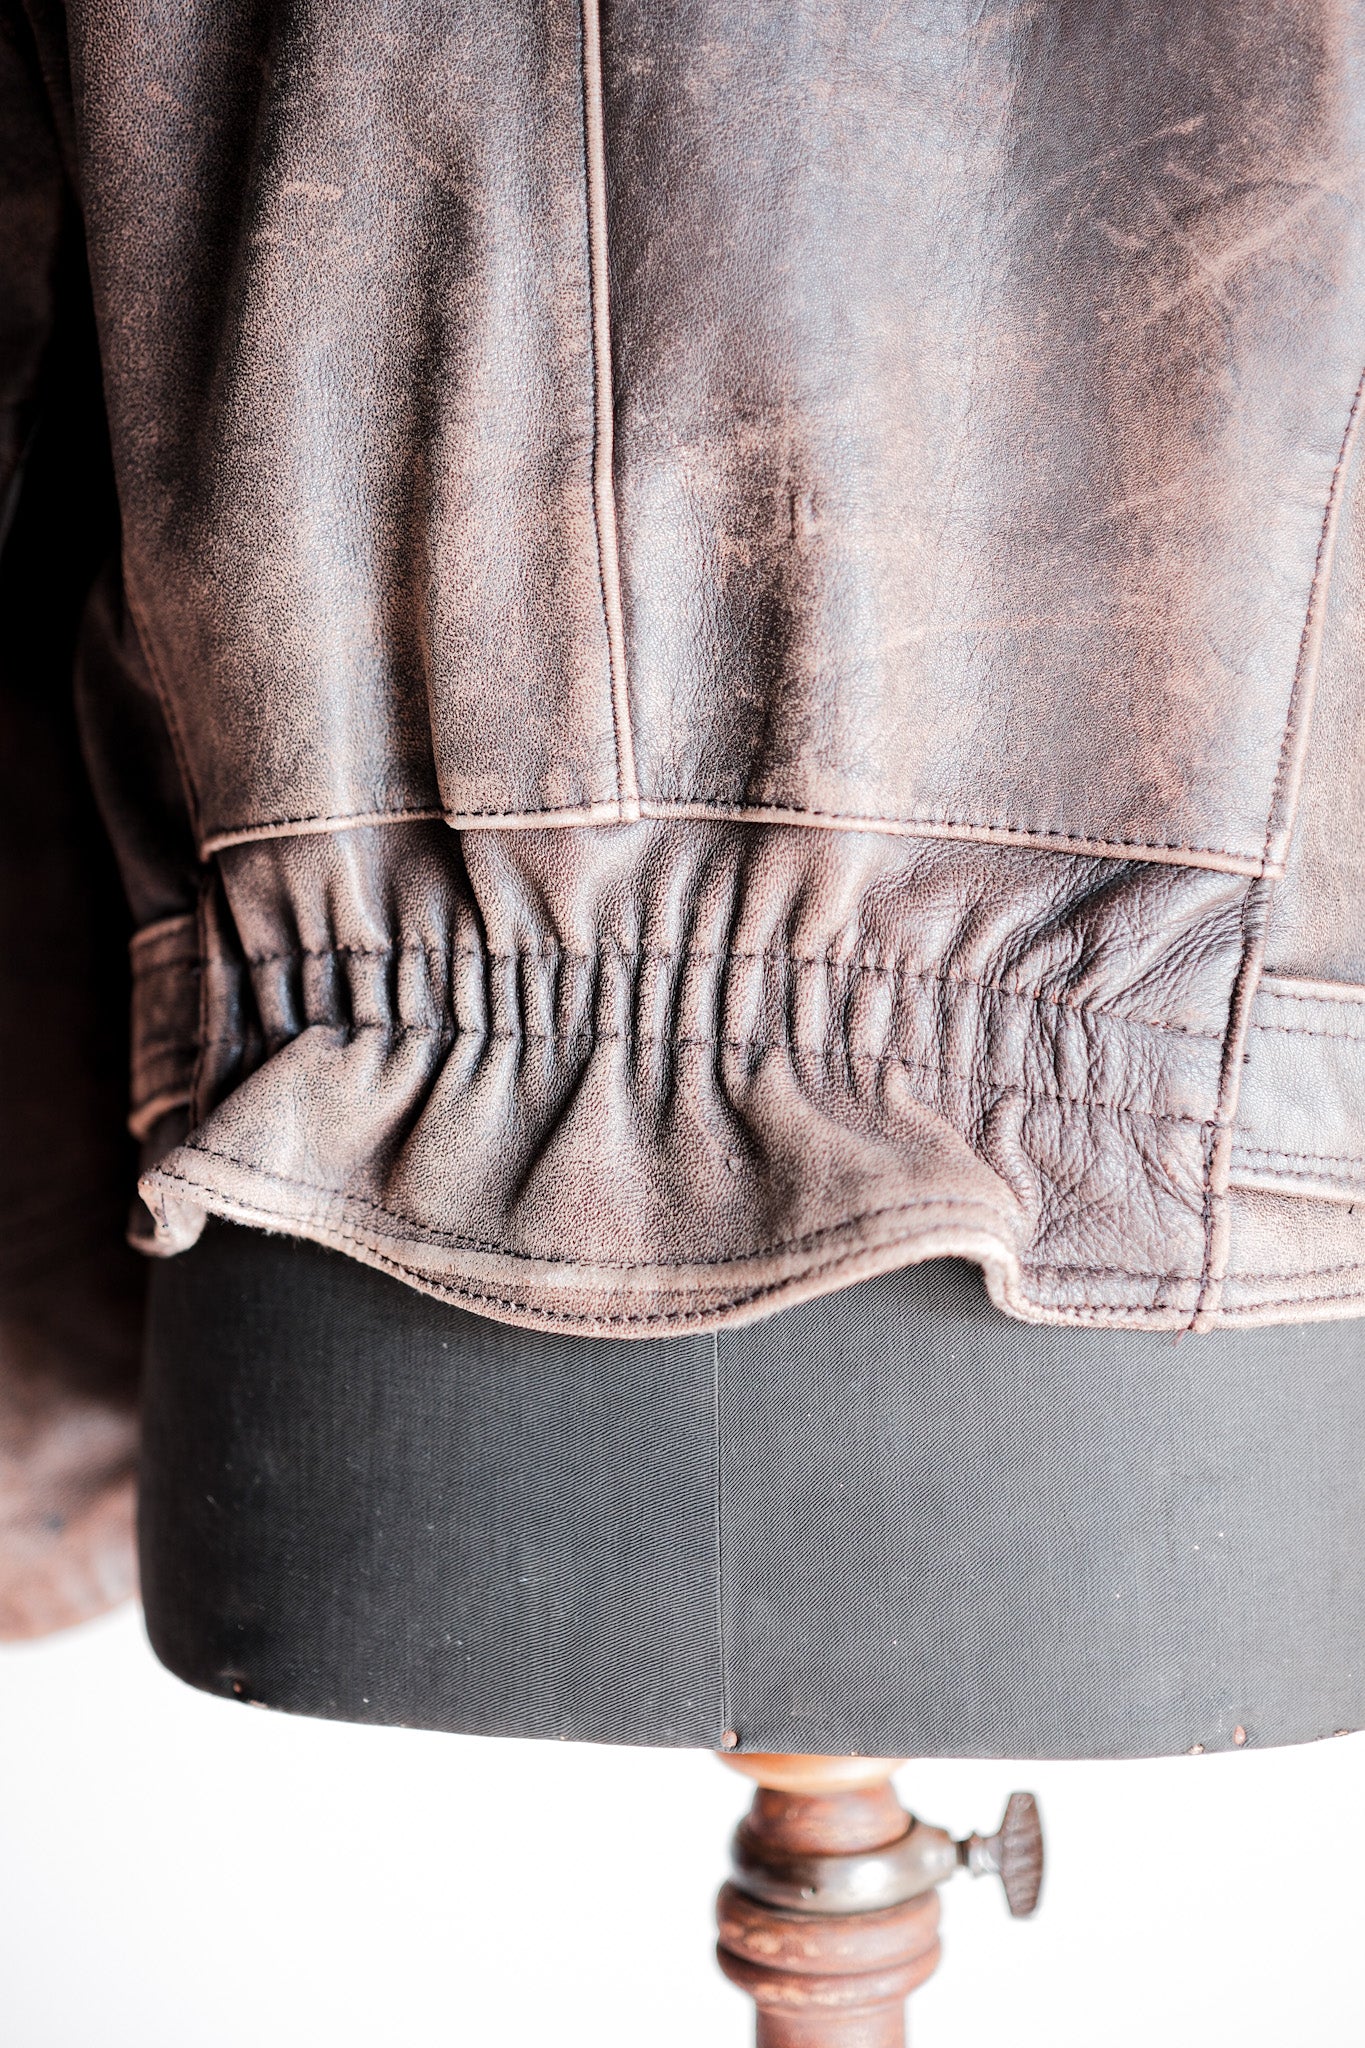 【~50's】French Vintage Le Corbusier Type Double Breasted Leather Jacket "Unusual Pattern"